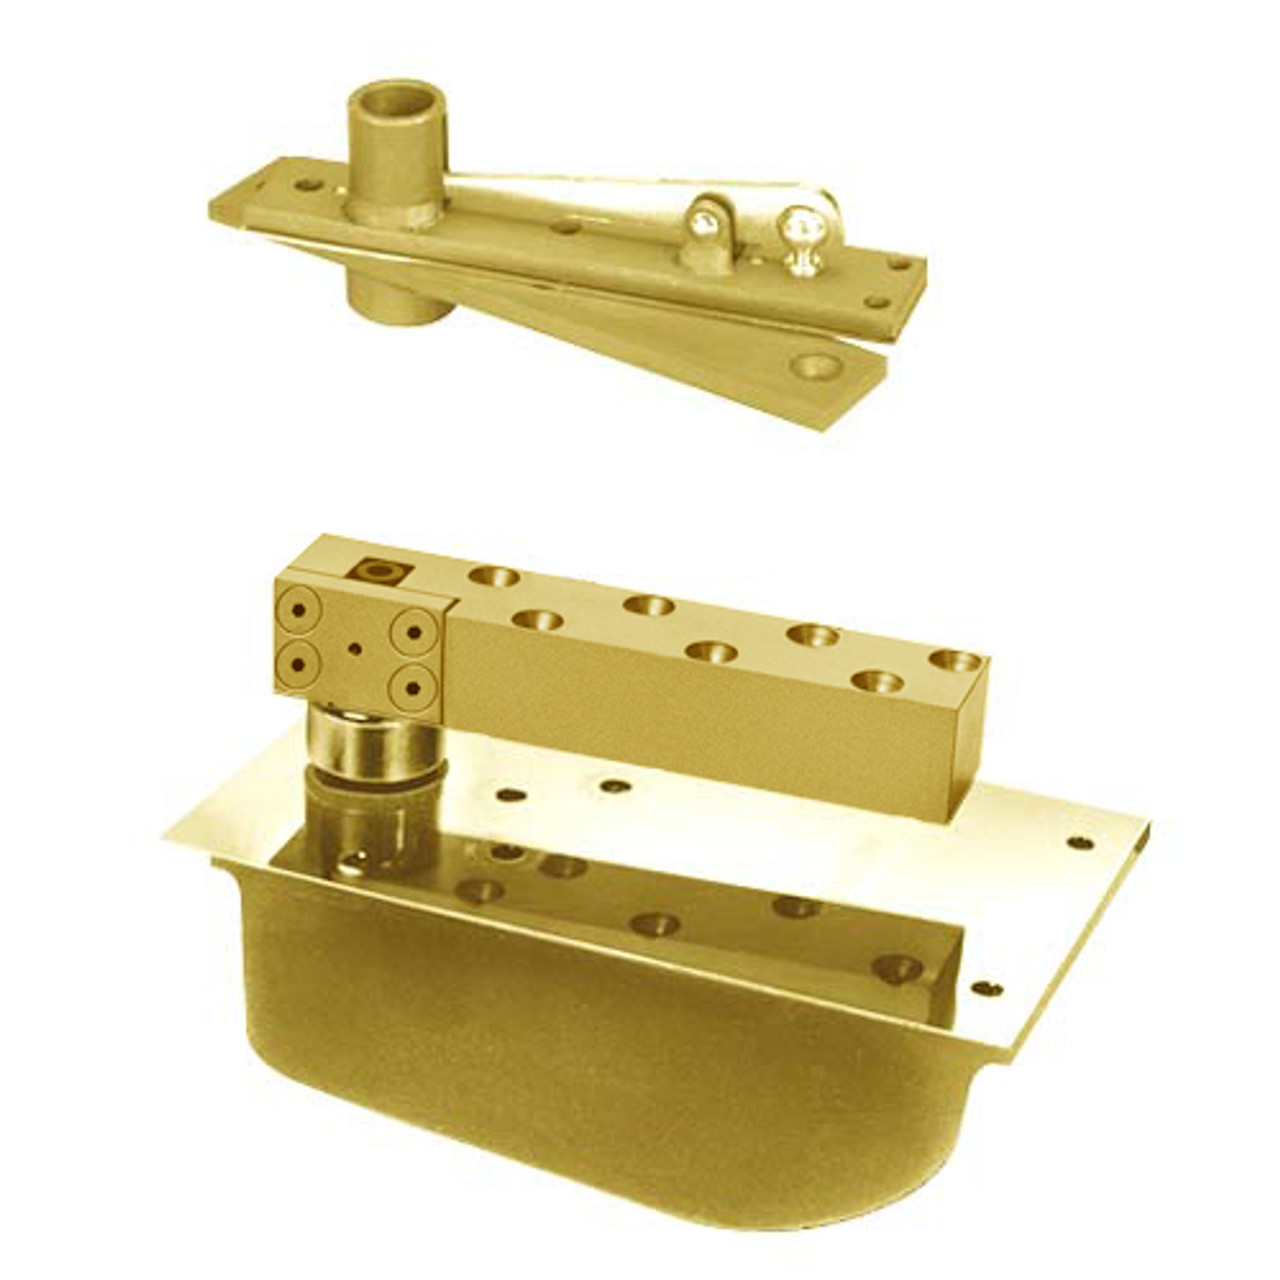 H28-90S-587-RH-605 Rixson 28 Series Extra Heavy Duty Single Acting Center Hung Concealed Floor Closer in Bright Brass Finish